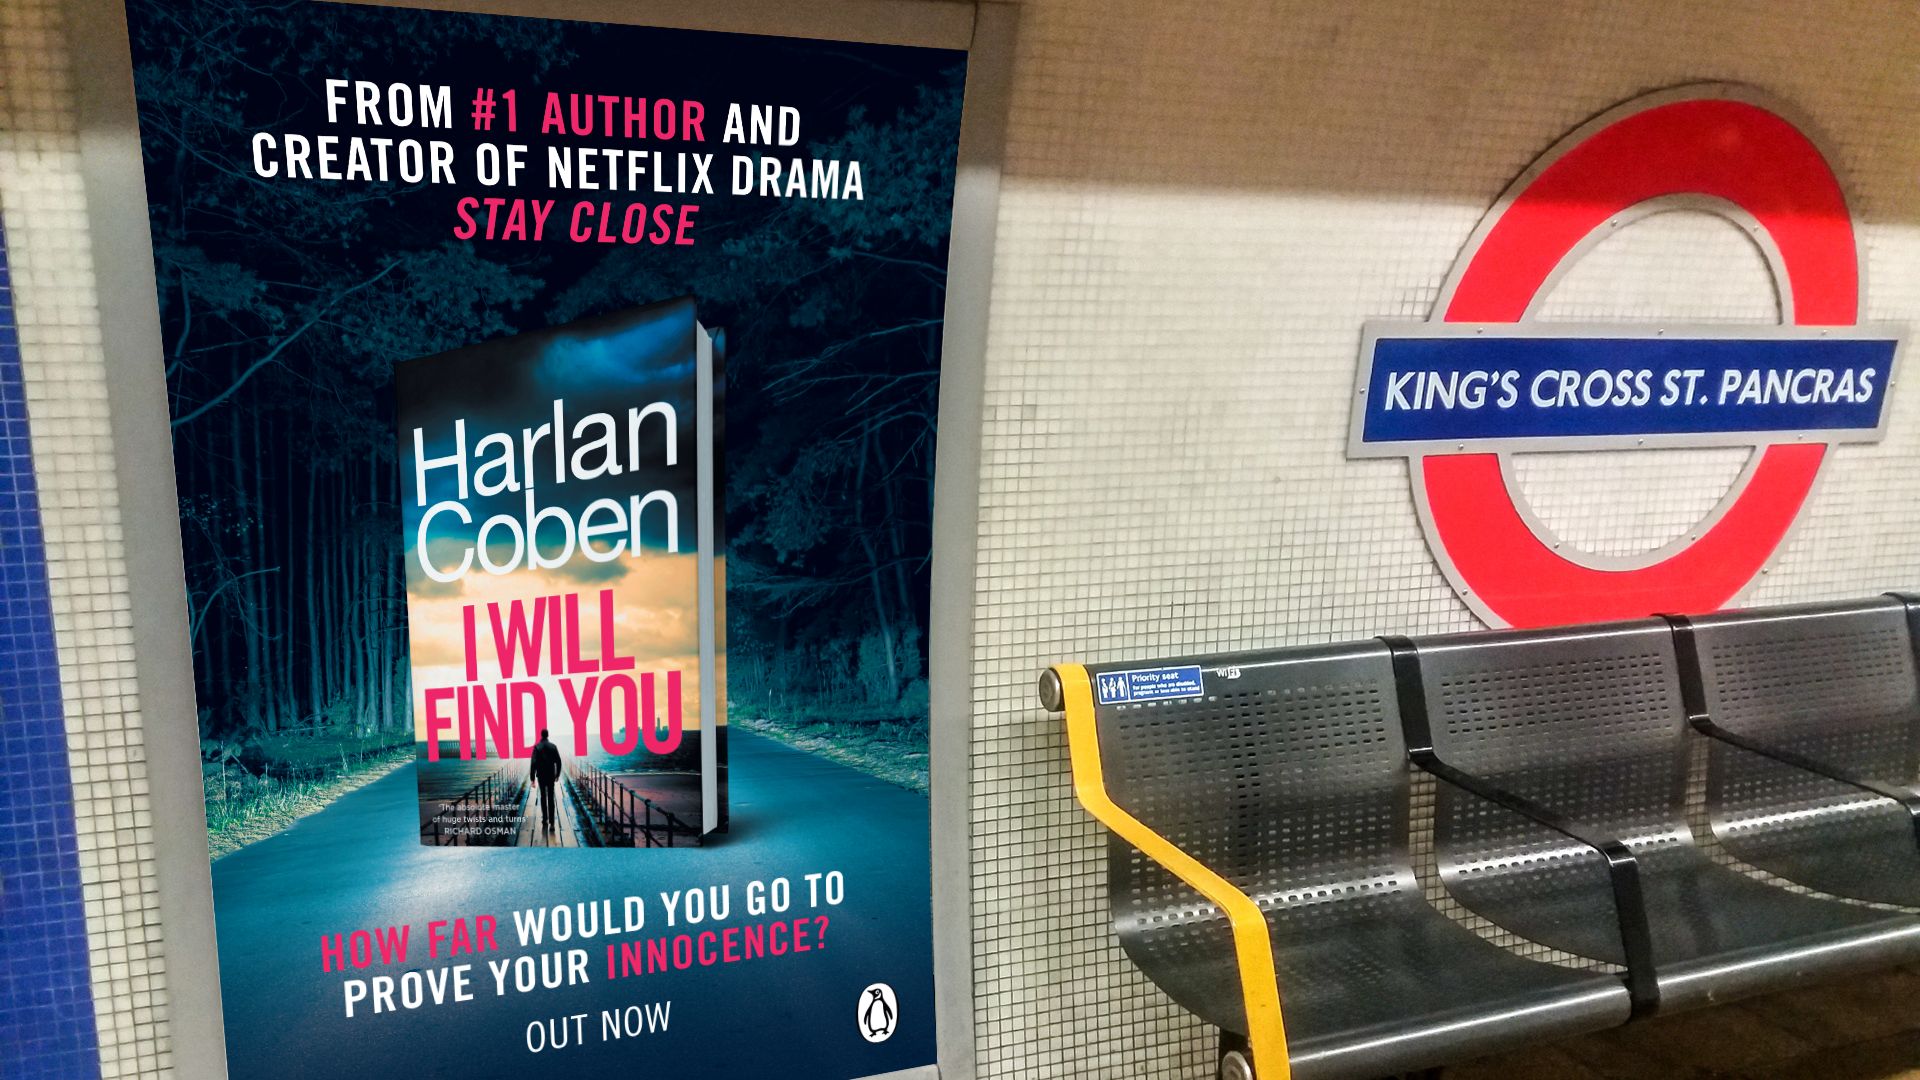 Harlan Coben's I Will Find You will be advertised across London and Manchester